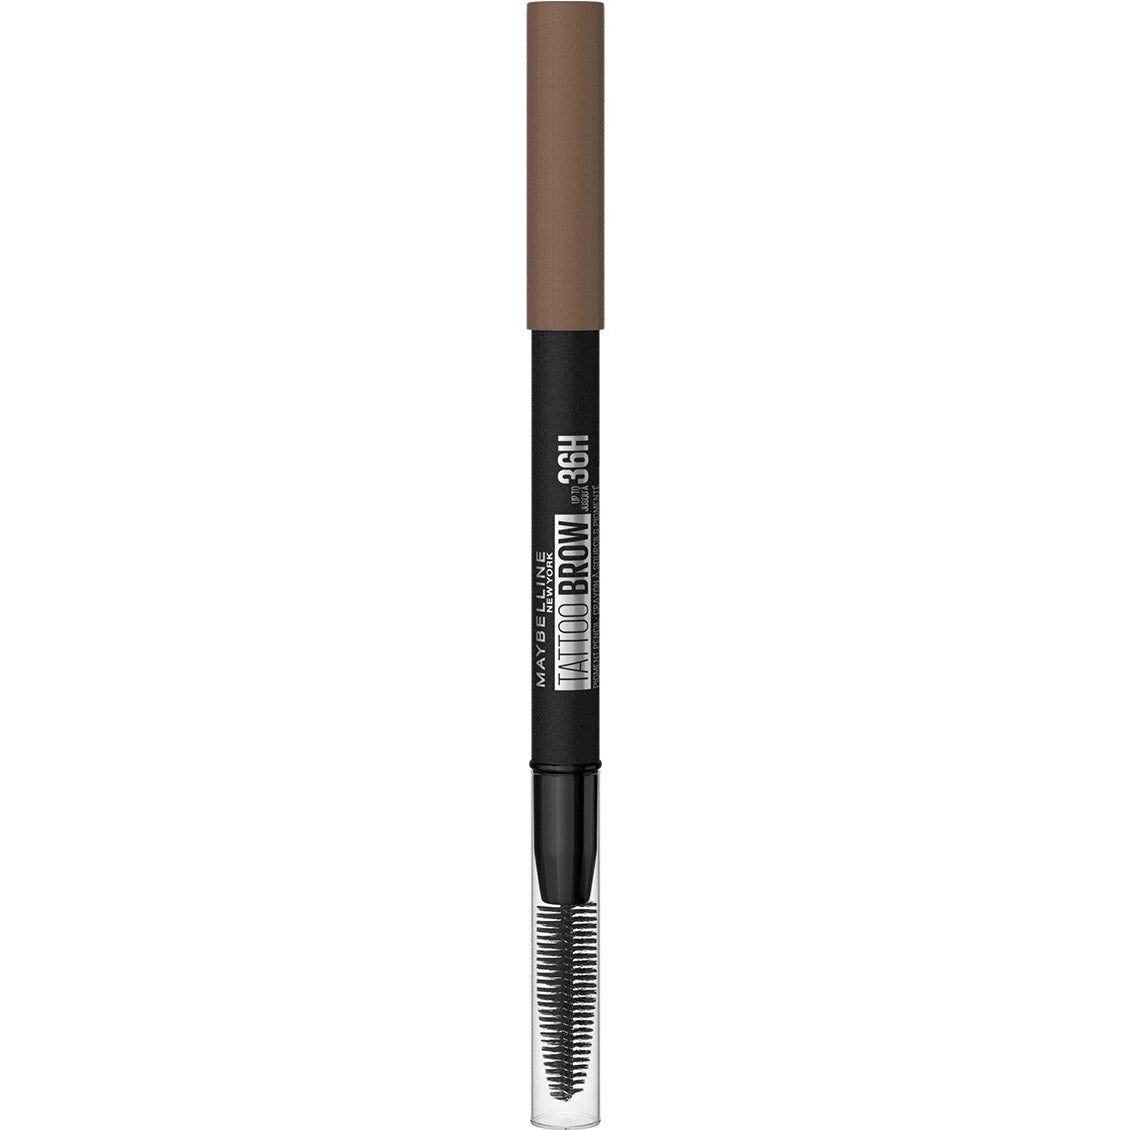 Maybelline Tattoo Brow 36 Hour Pencil